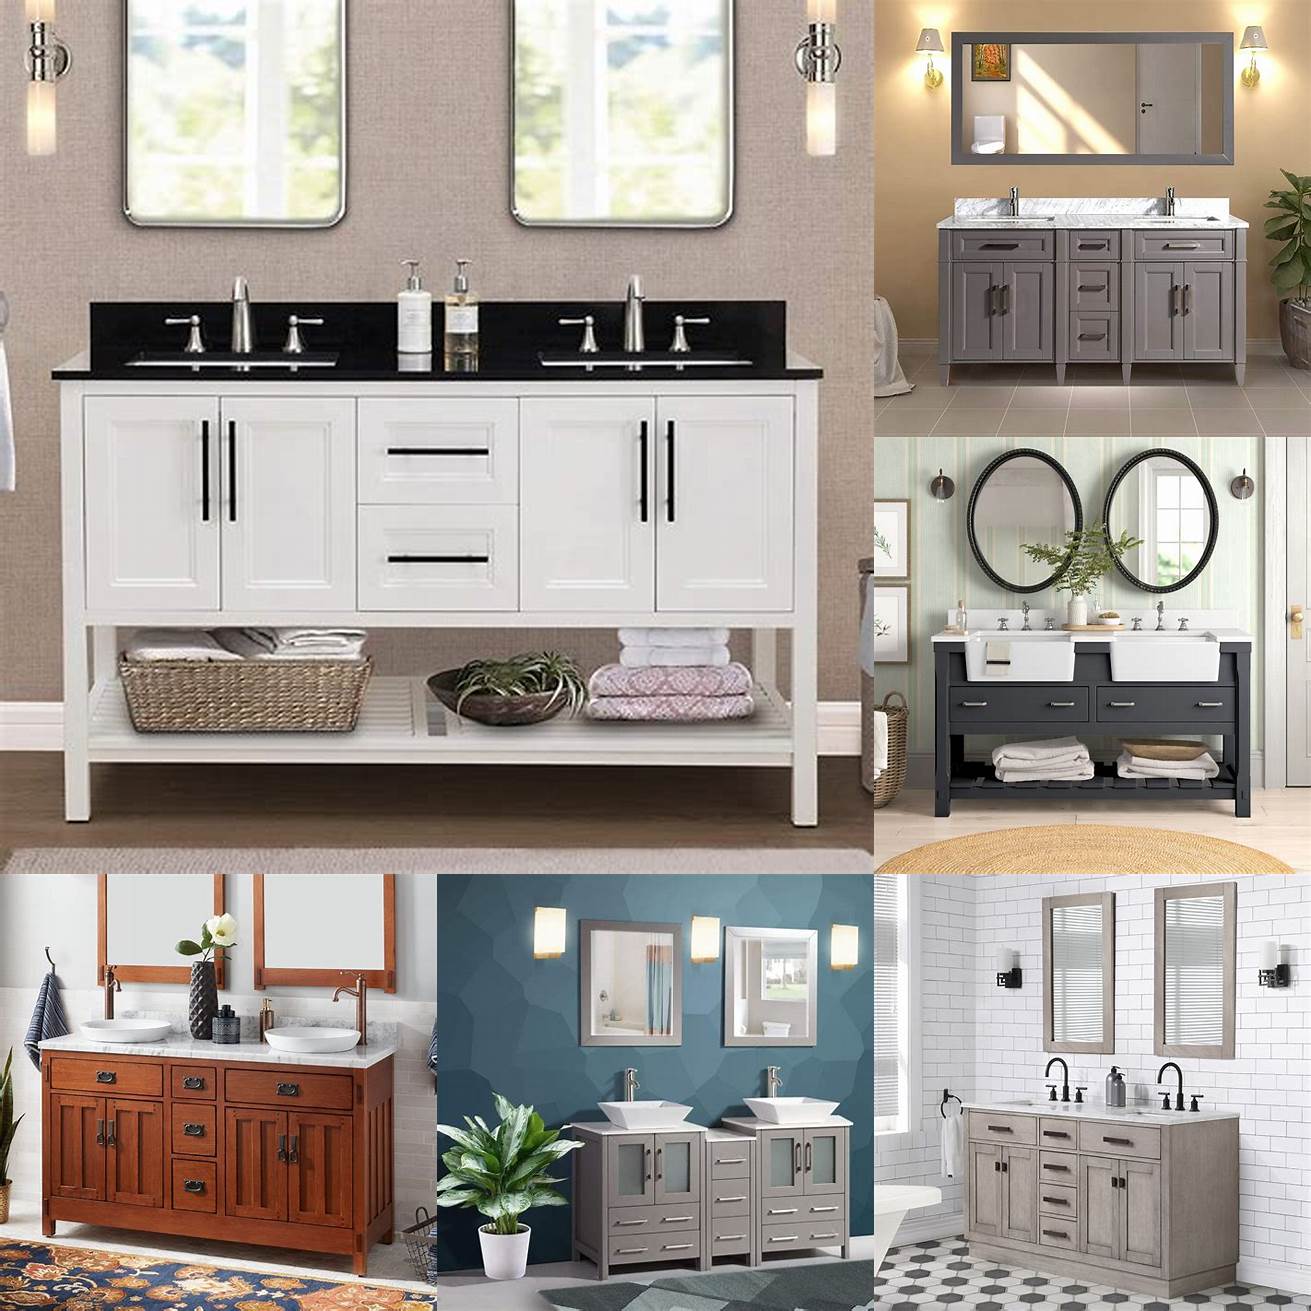 Style Double vanities come in various styles and materials so you can choose the one that matches your bathrooms aesthetics